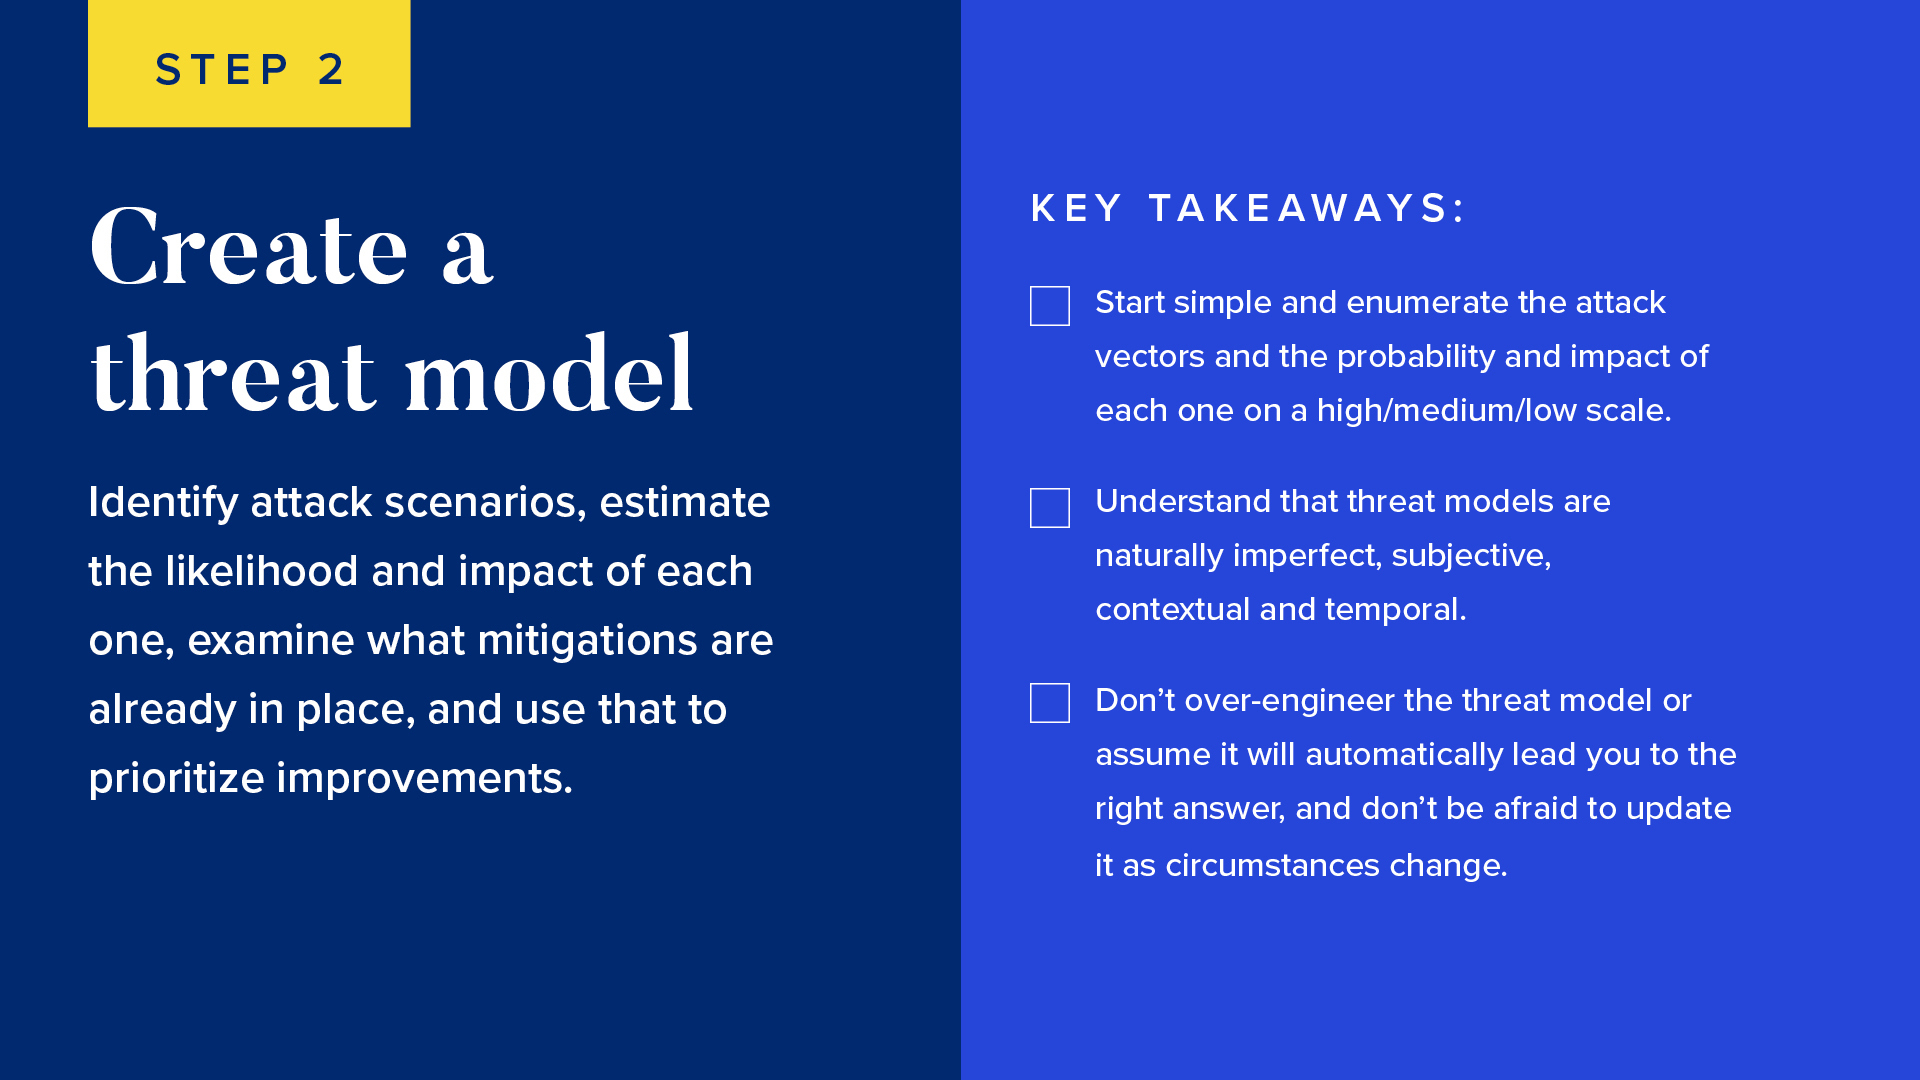 Identify attack scenarios, estimate the likelihood and impact of each one, examine what mitigations are already in place, and use that to prioritize improvements.

Tips for building a threat model: 
Start simple and enumerate the attack vectors and the probability and impact of each one on a high/medium/low scale. 
Understand that threat models are naturally imperfect, subjective, contextual and temporal.
Don’t over-engineer the threat model or assume it will automatically lead you to the right answer, and don’t be afraid to update it as circumstances change.
